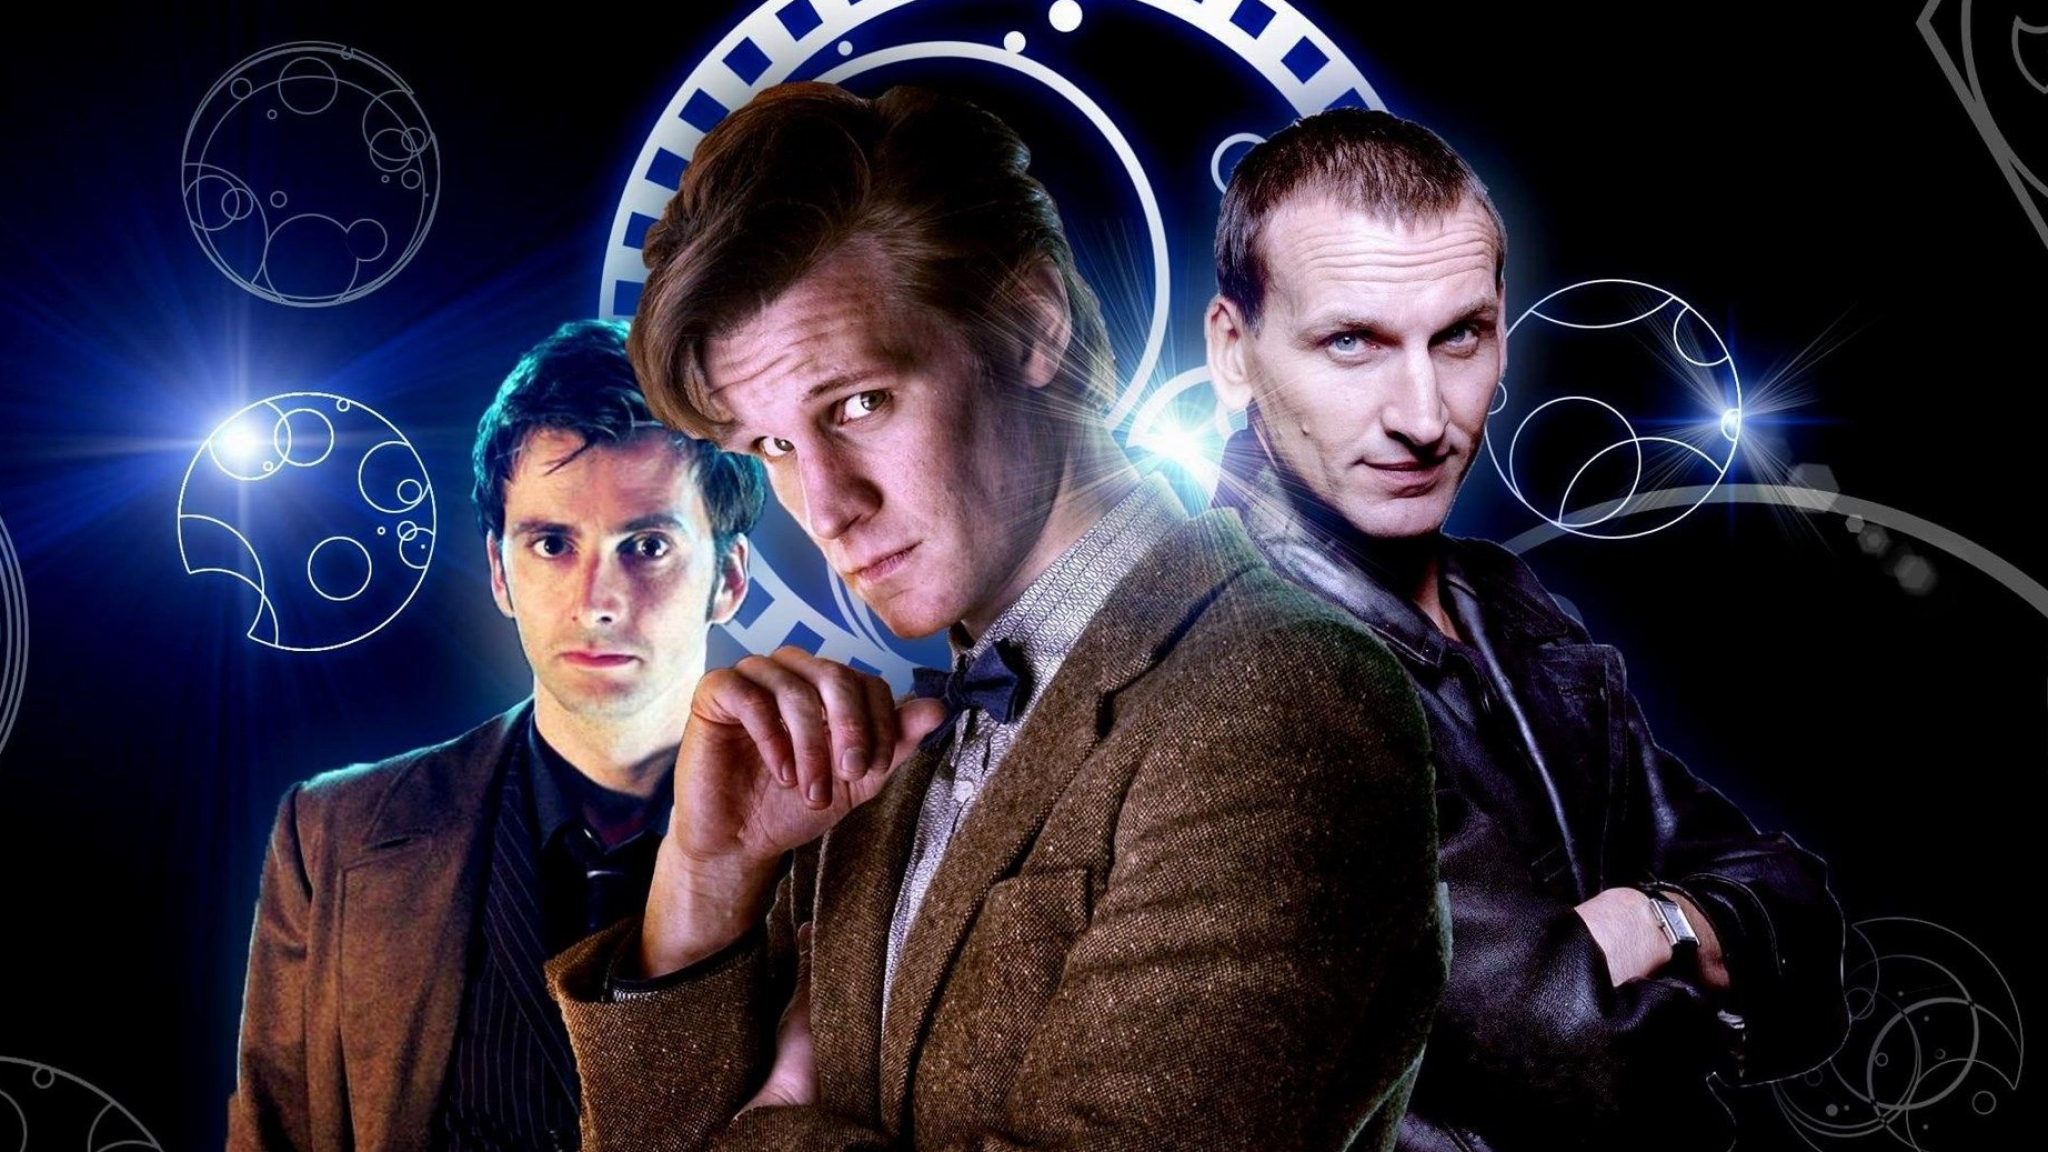 11th Doctor Who HD wallpapers, Top-quality backgrounds, Stunning visual appeal, Doctor Who fandom, 2050x1160 HD Desktop